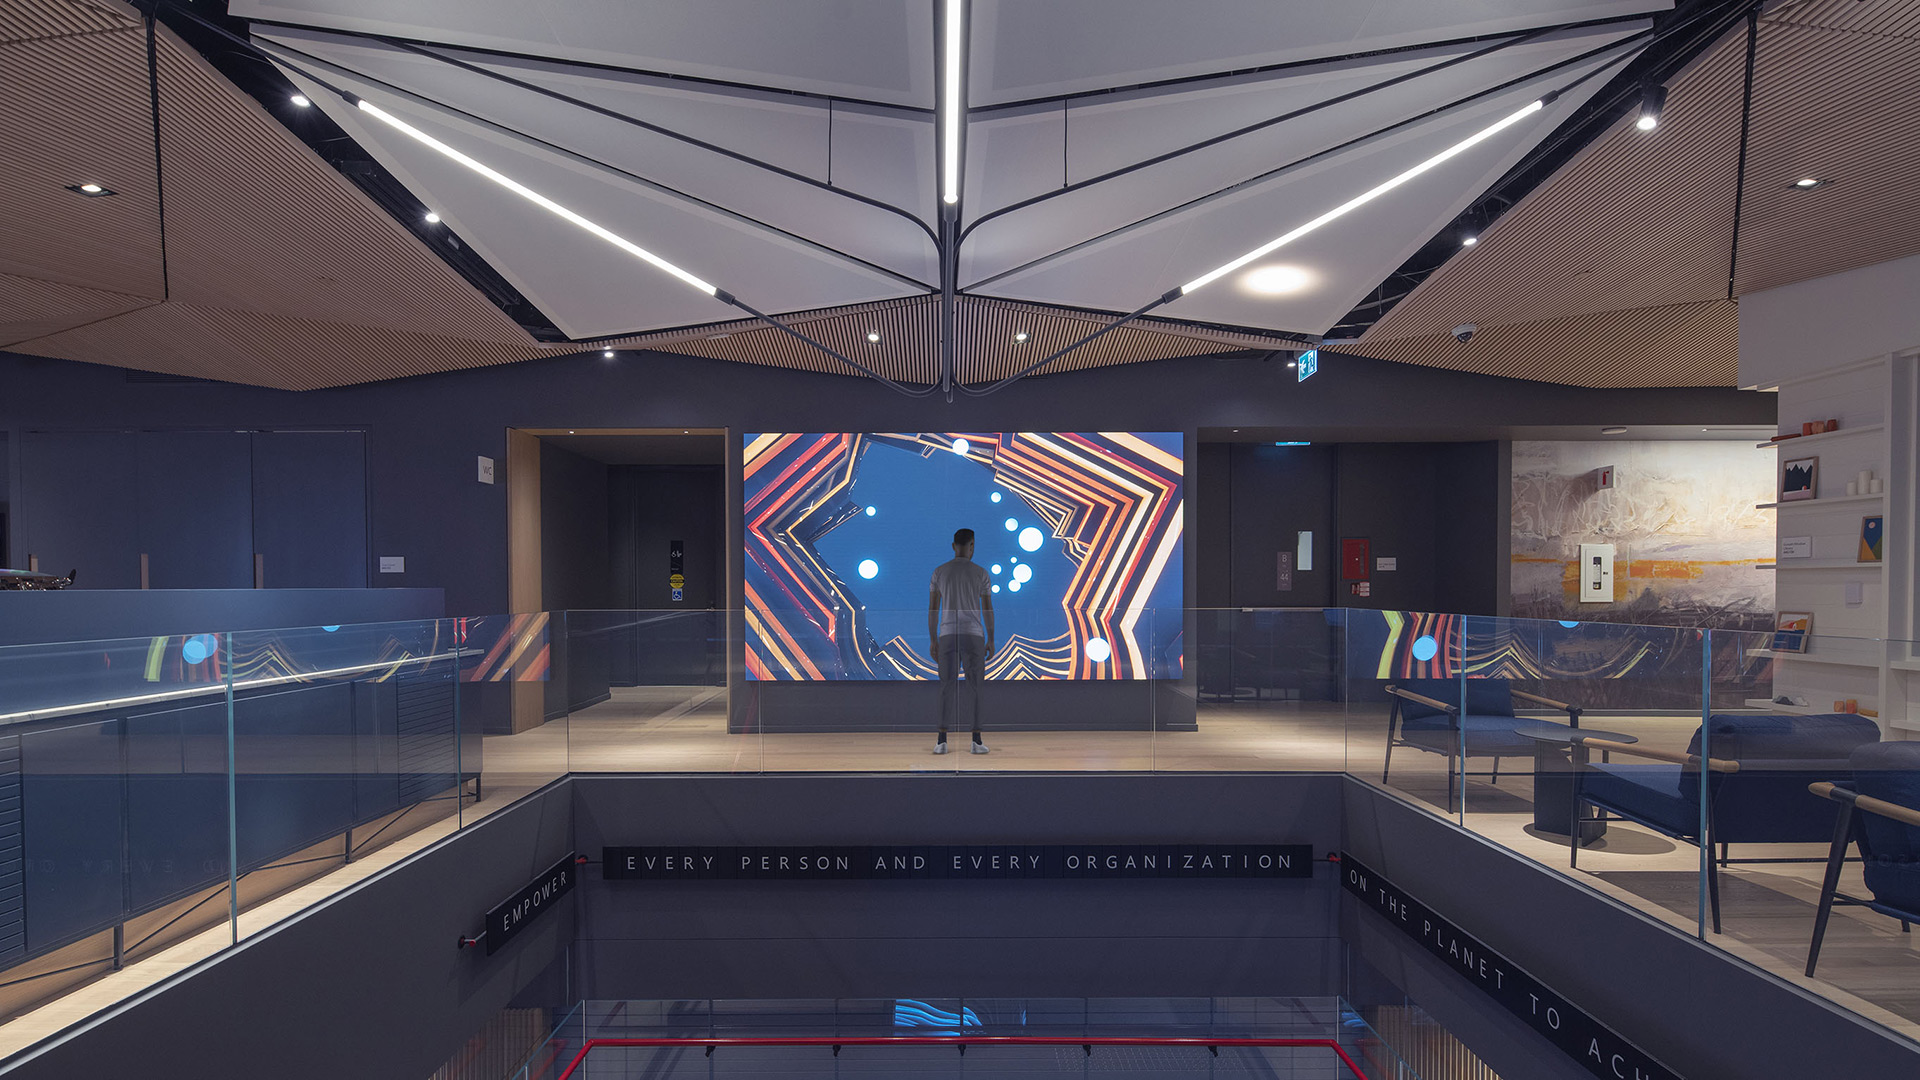 A stylish new lobby with a large screen on the wall and a person standing in front of it. The screen displays the night version of the interactive data visualization called Day by Red Paper Heart.